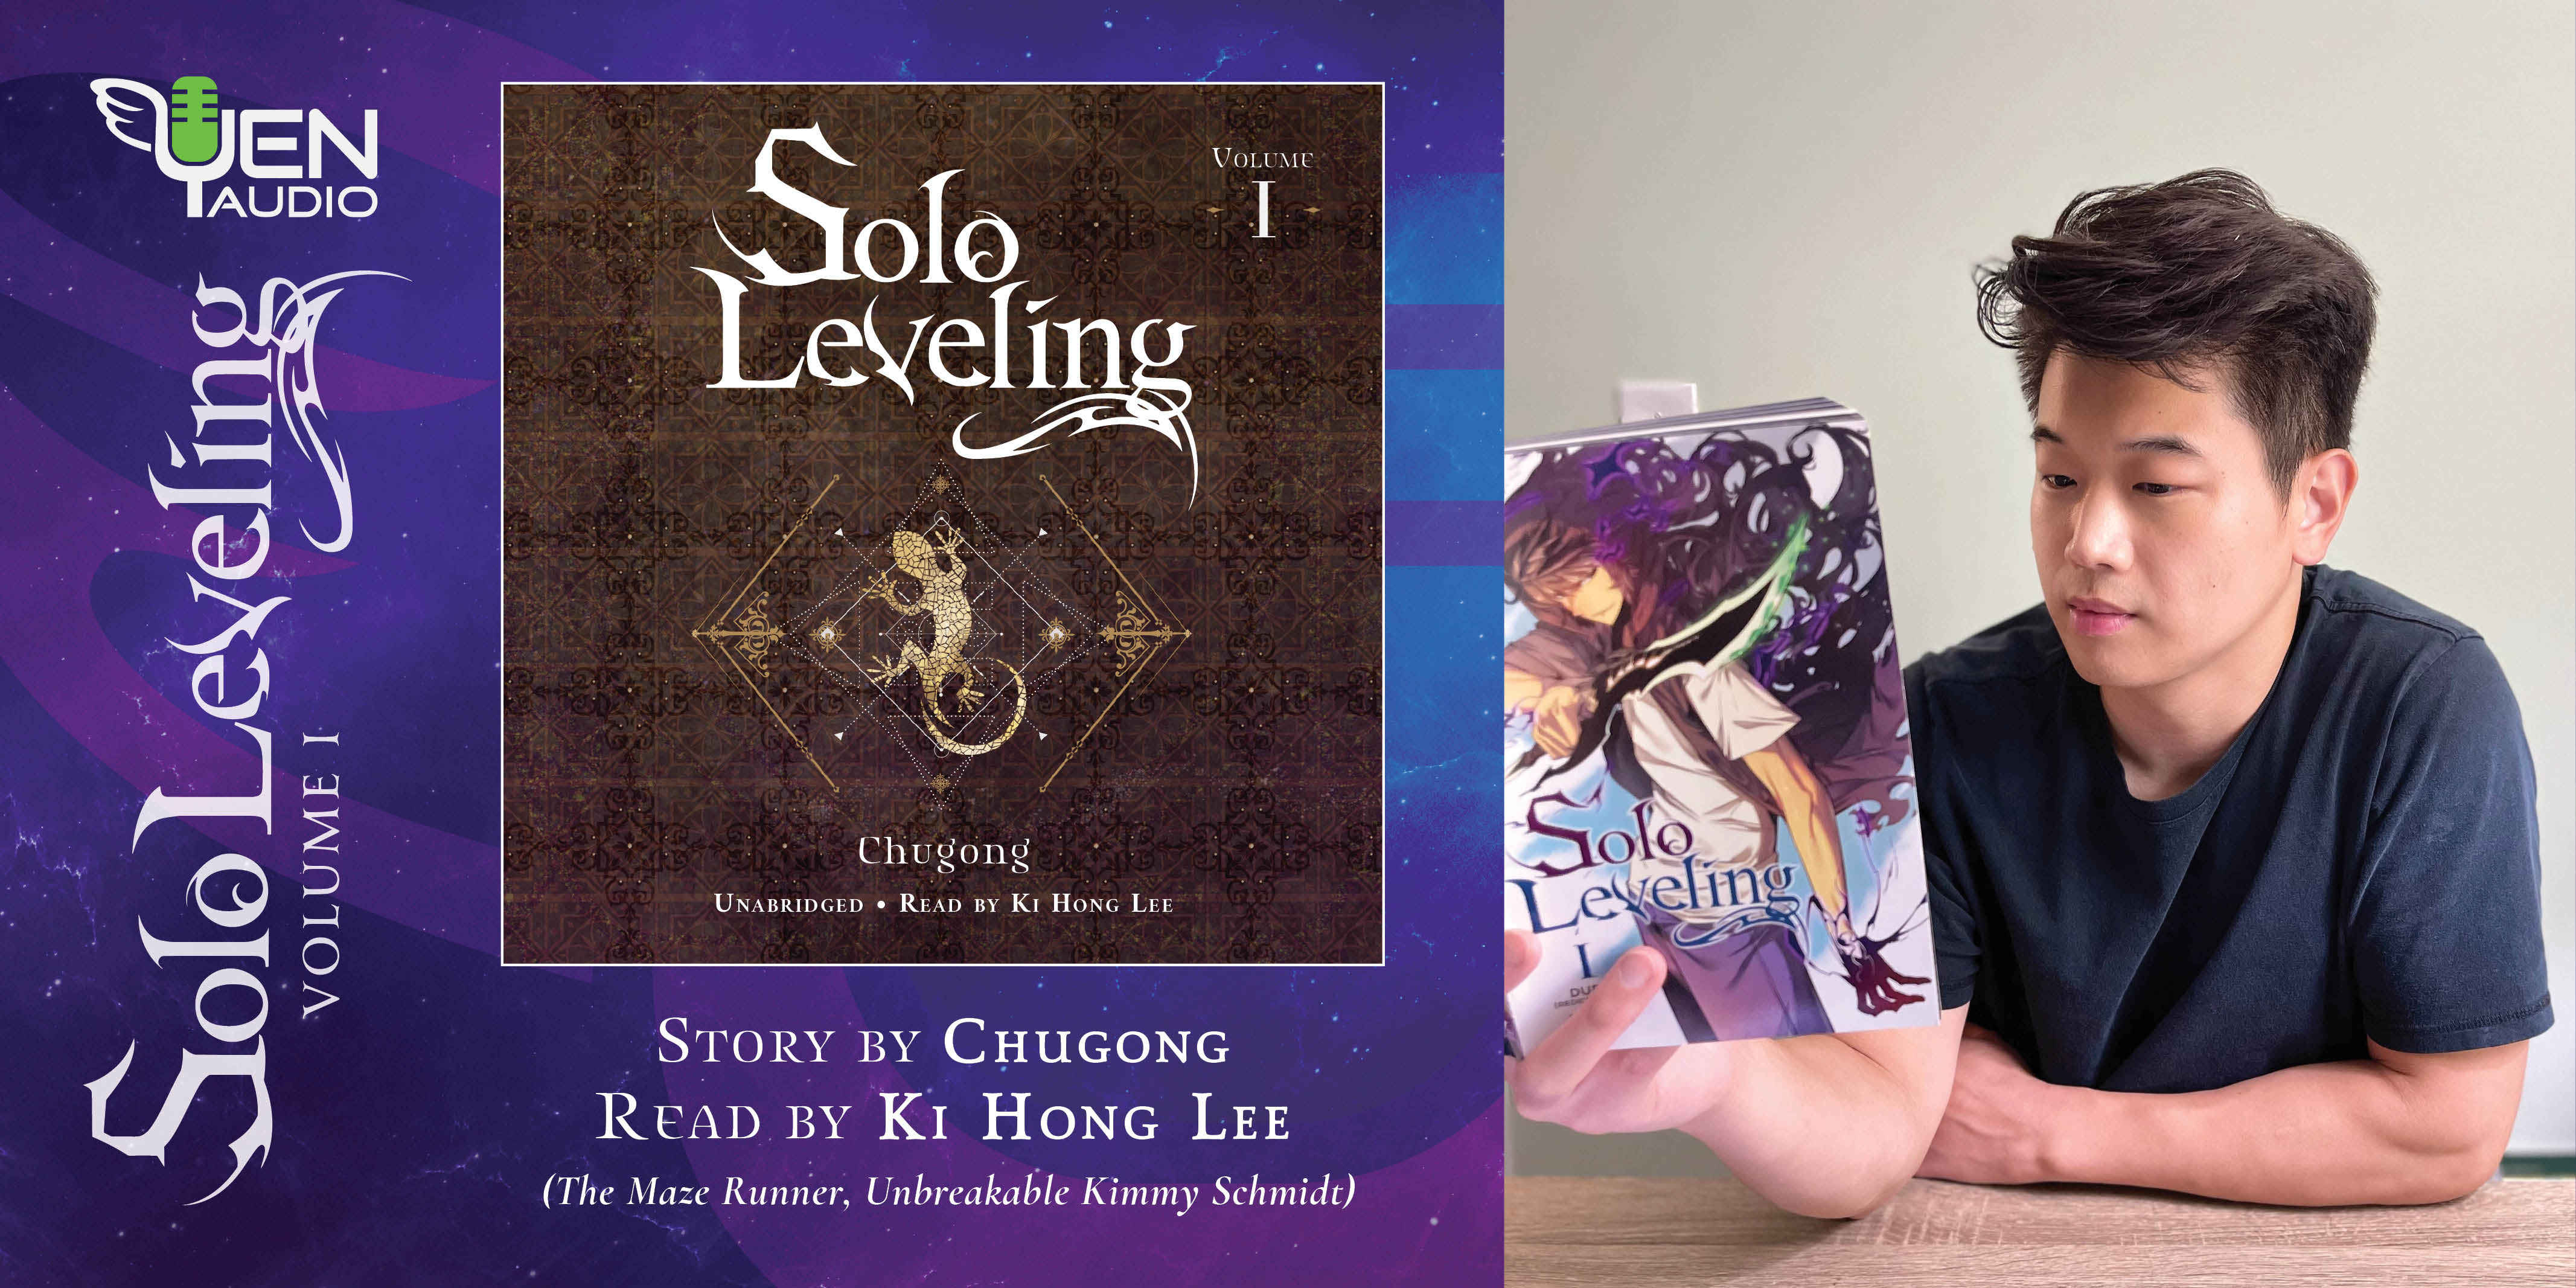 Solo Leveling, Vol. 8 Audiobook by Chugong — Audiobooks & Podcasts